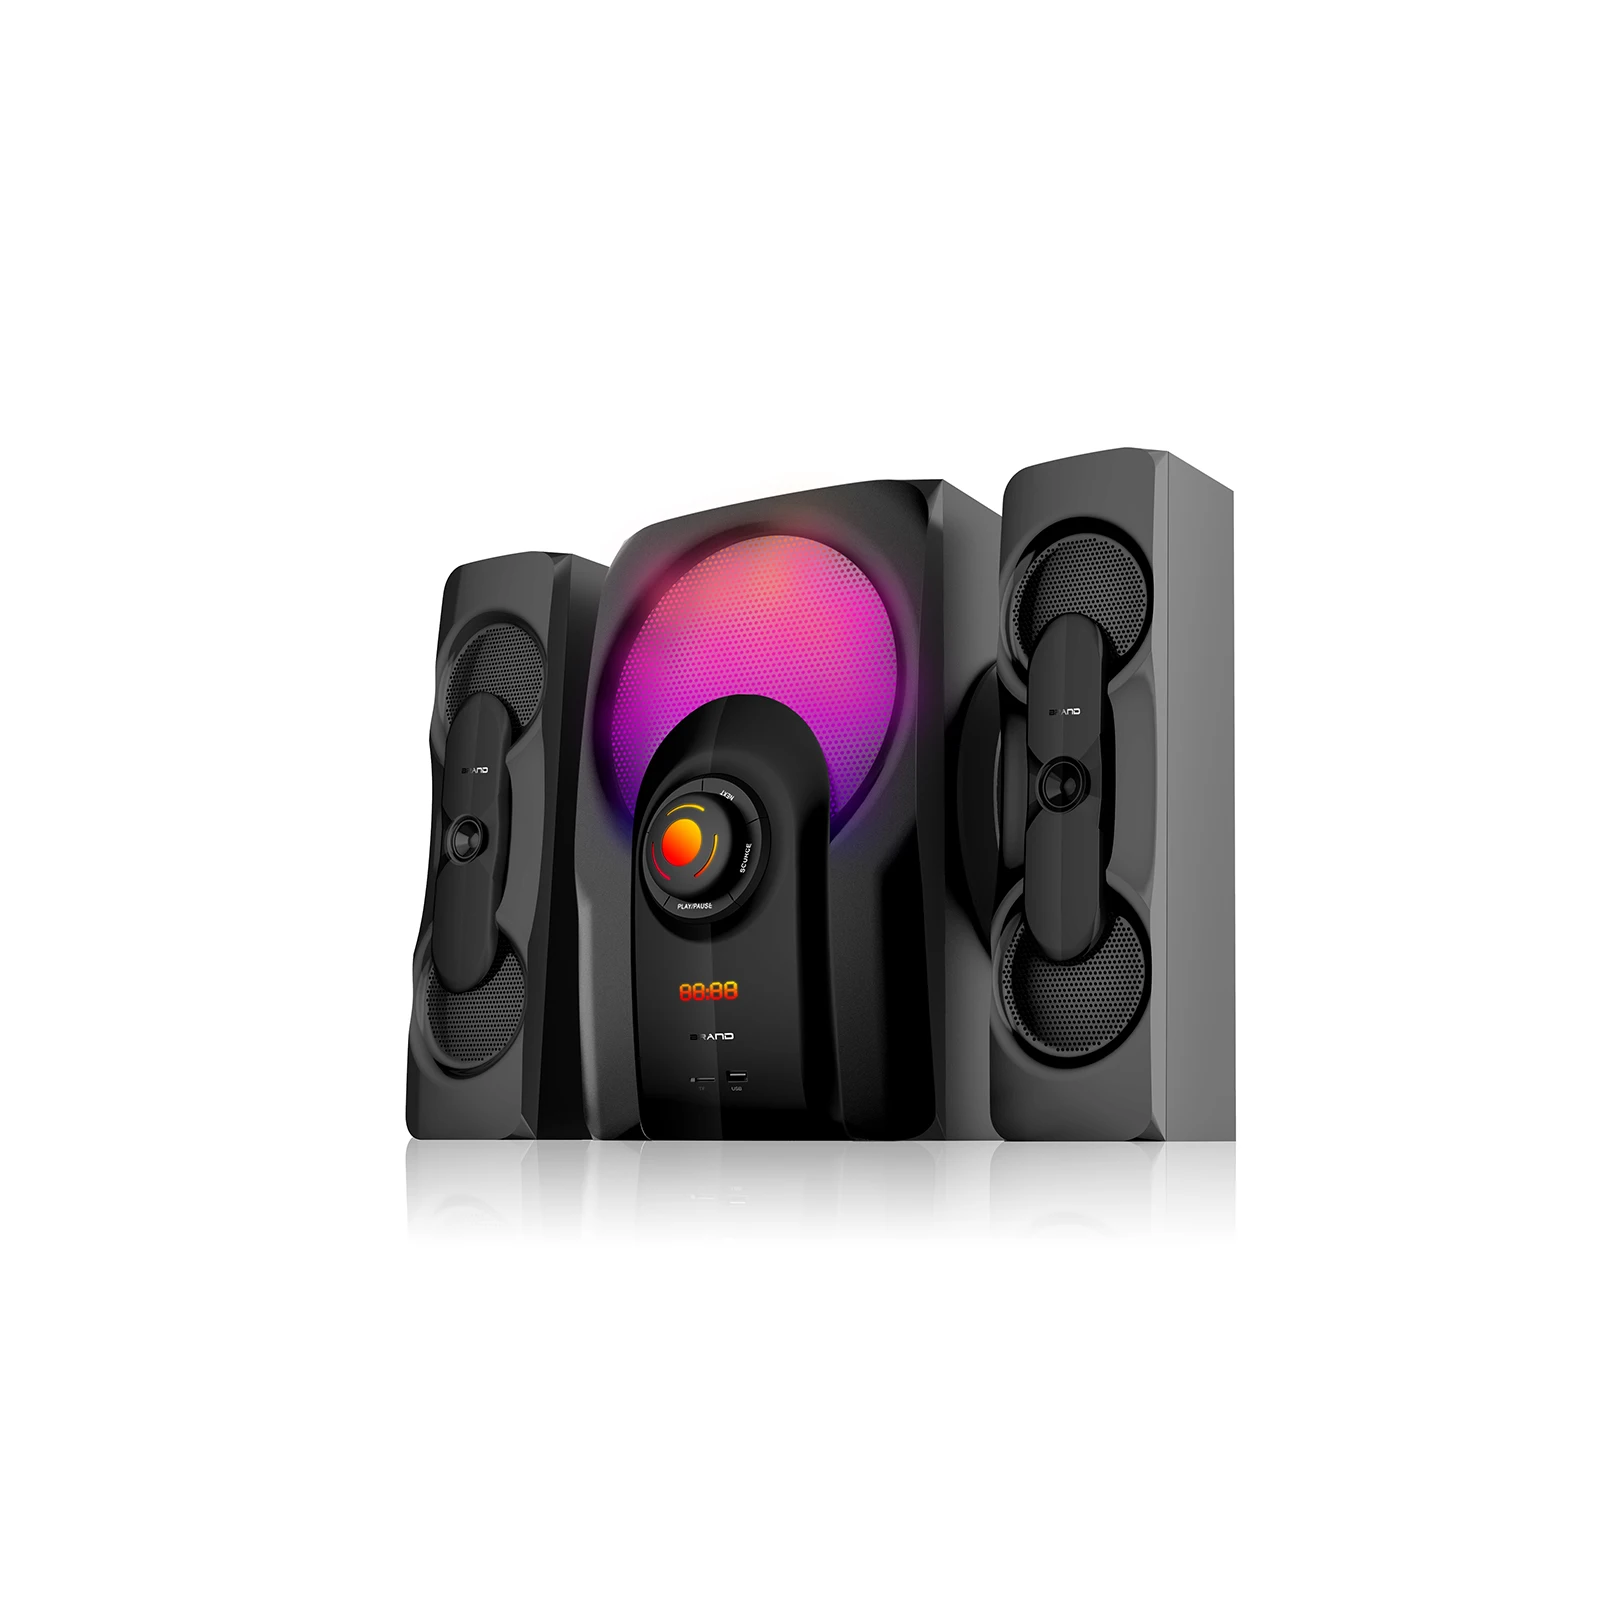 TK-821-3.1 Top Quality home theater system Surround sound BT subwoofer multimedia speaker